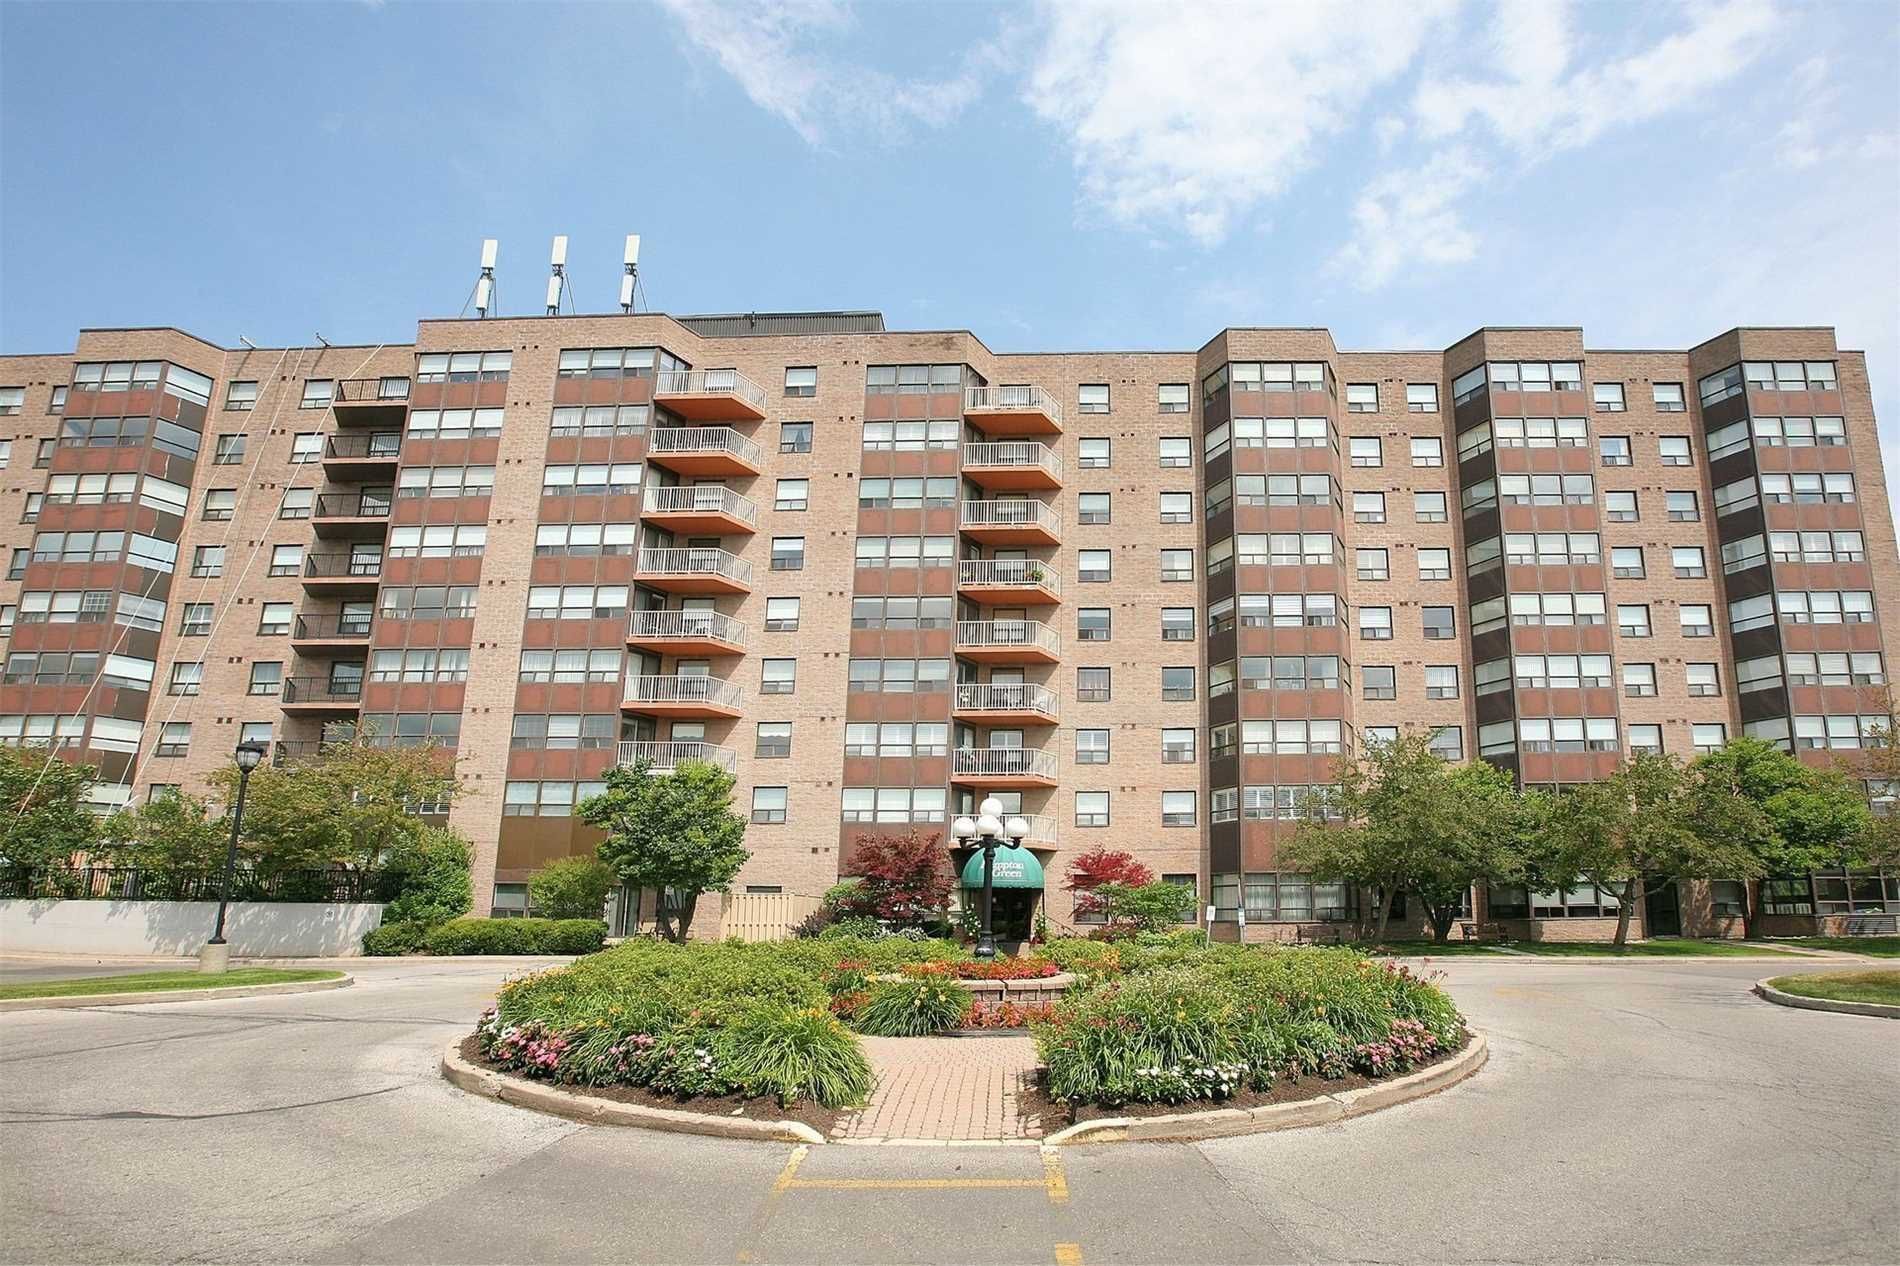 Main Photo: 401 2 Raymerville Drive in Markham: Raymerville Condo for sale : MLS®# N5206252